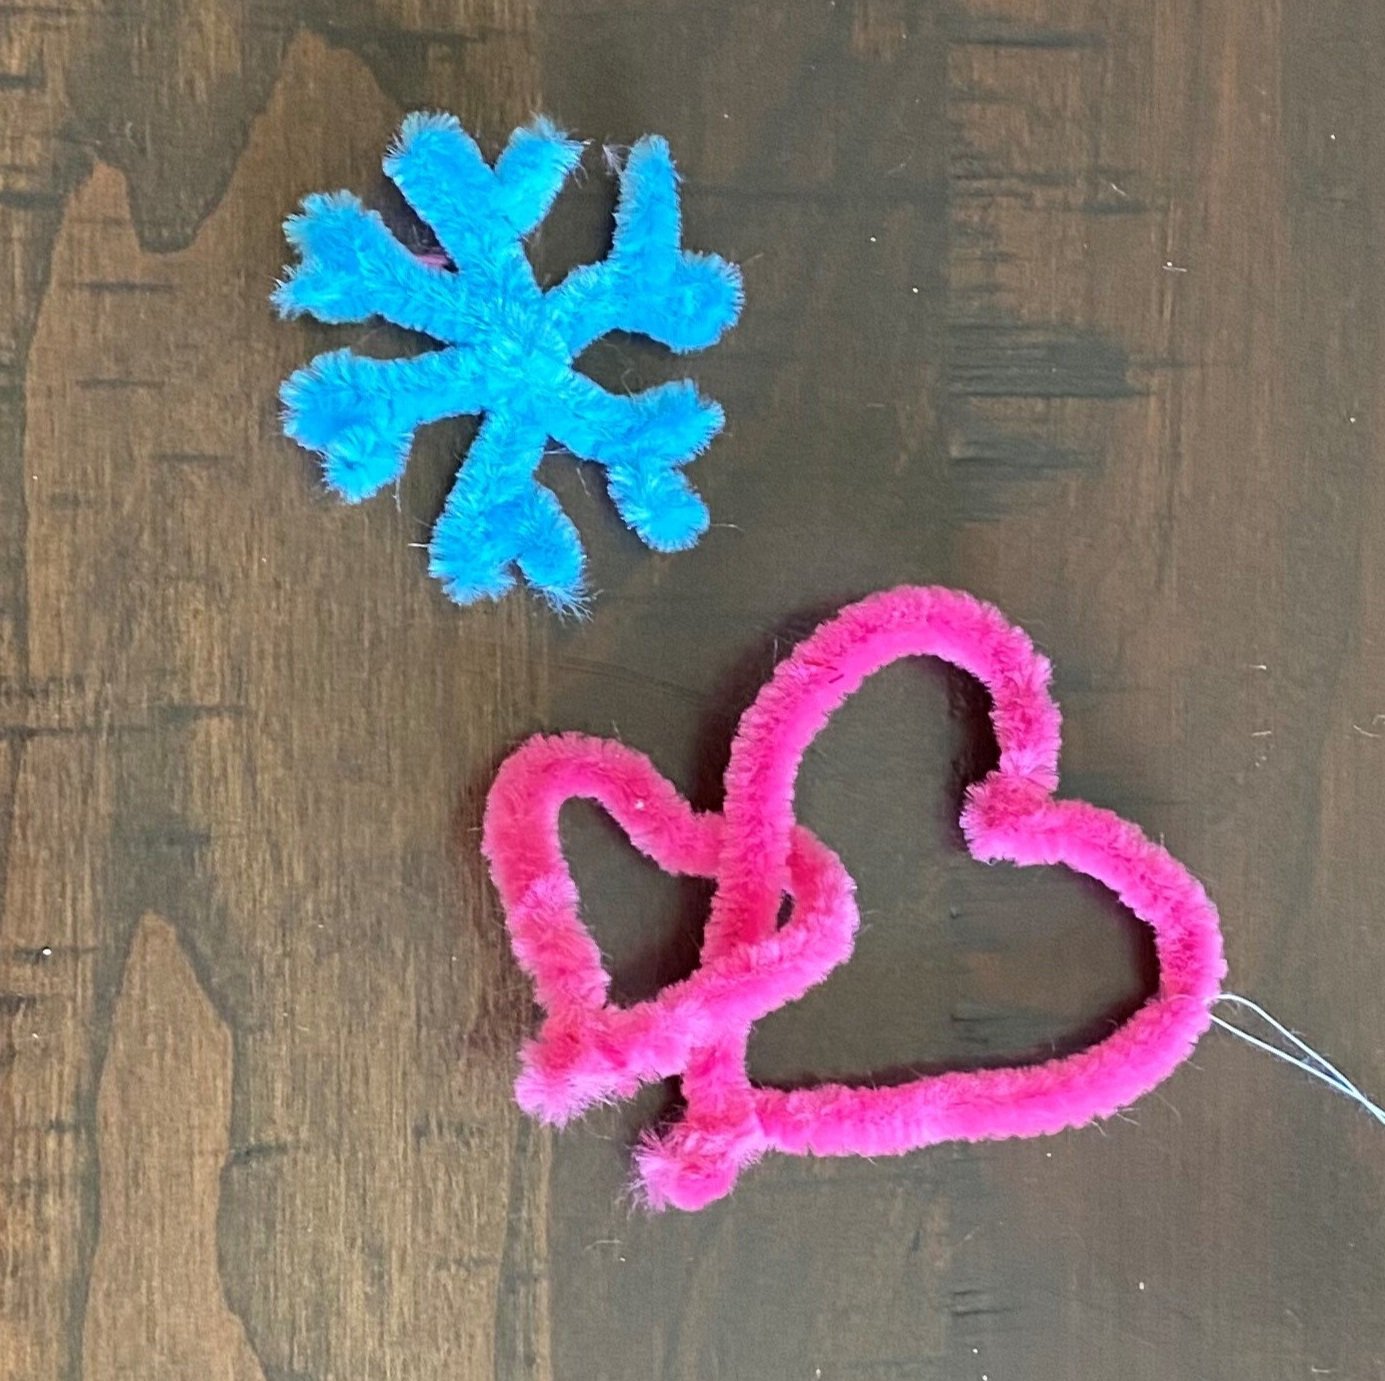 Borax Crystal Hearts Valentine's Craft for Kids - That Kids' Craft Site